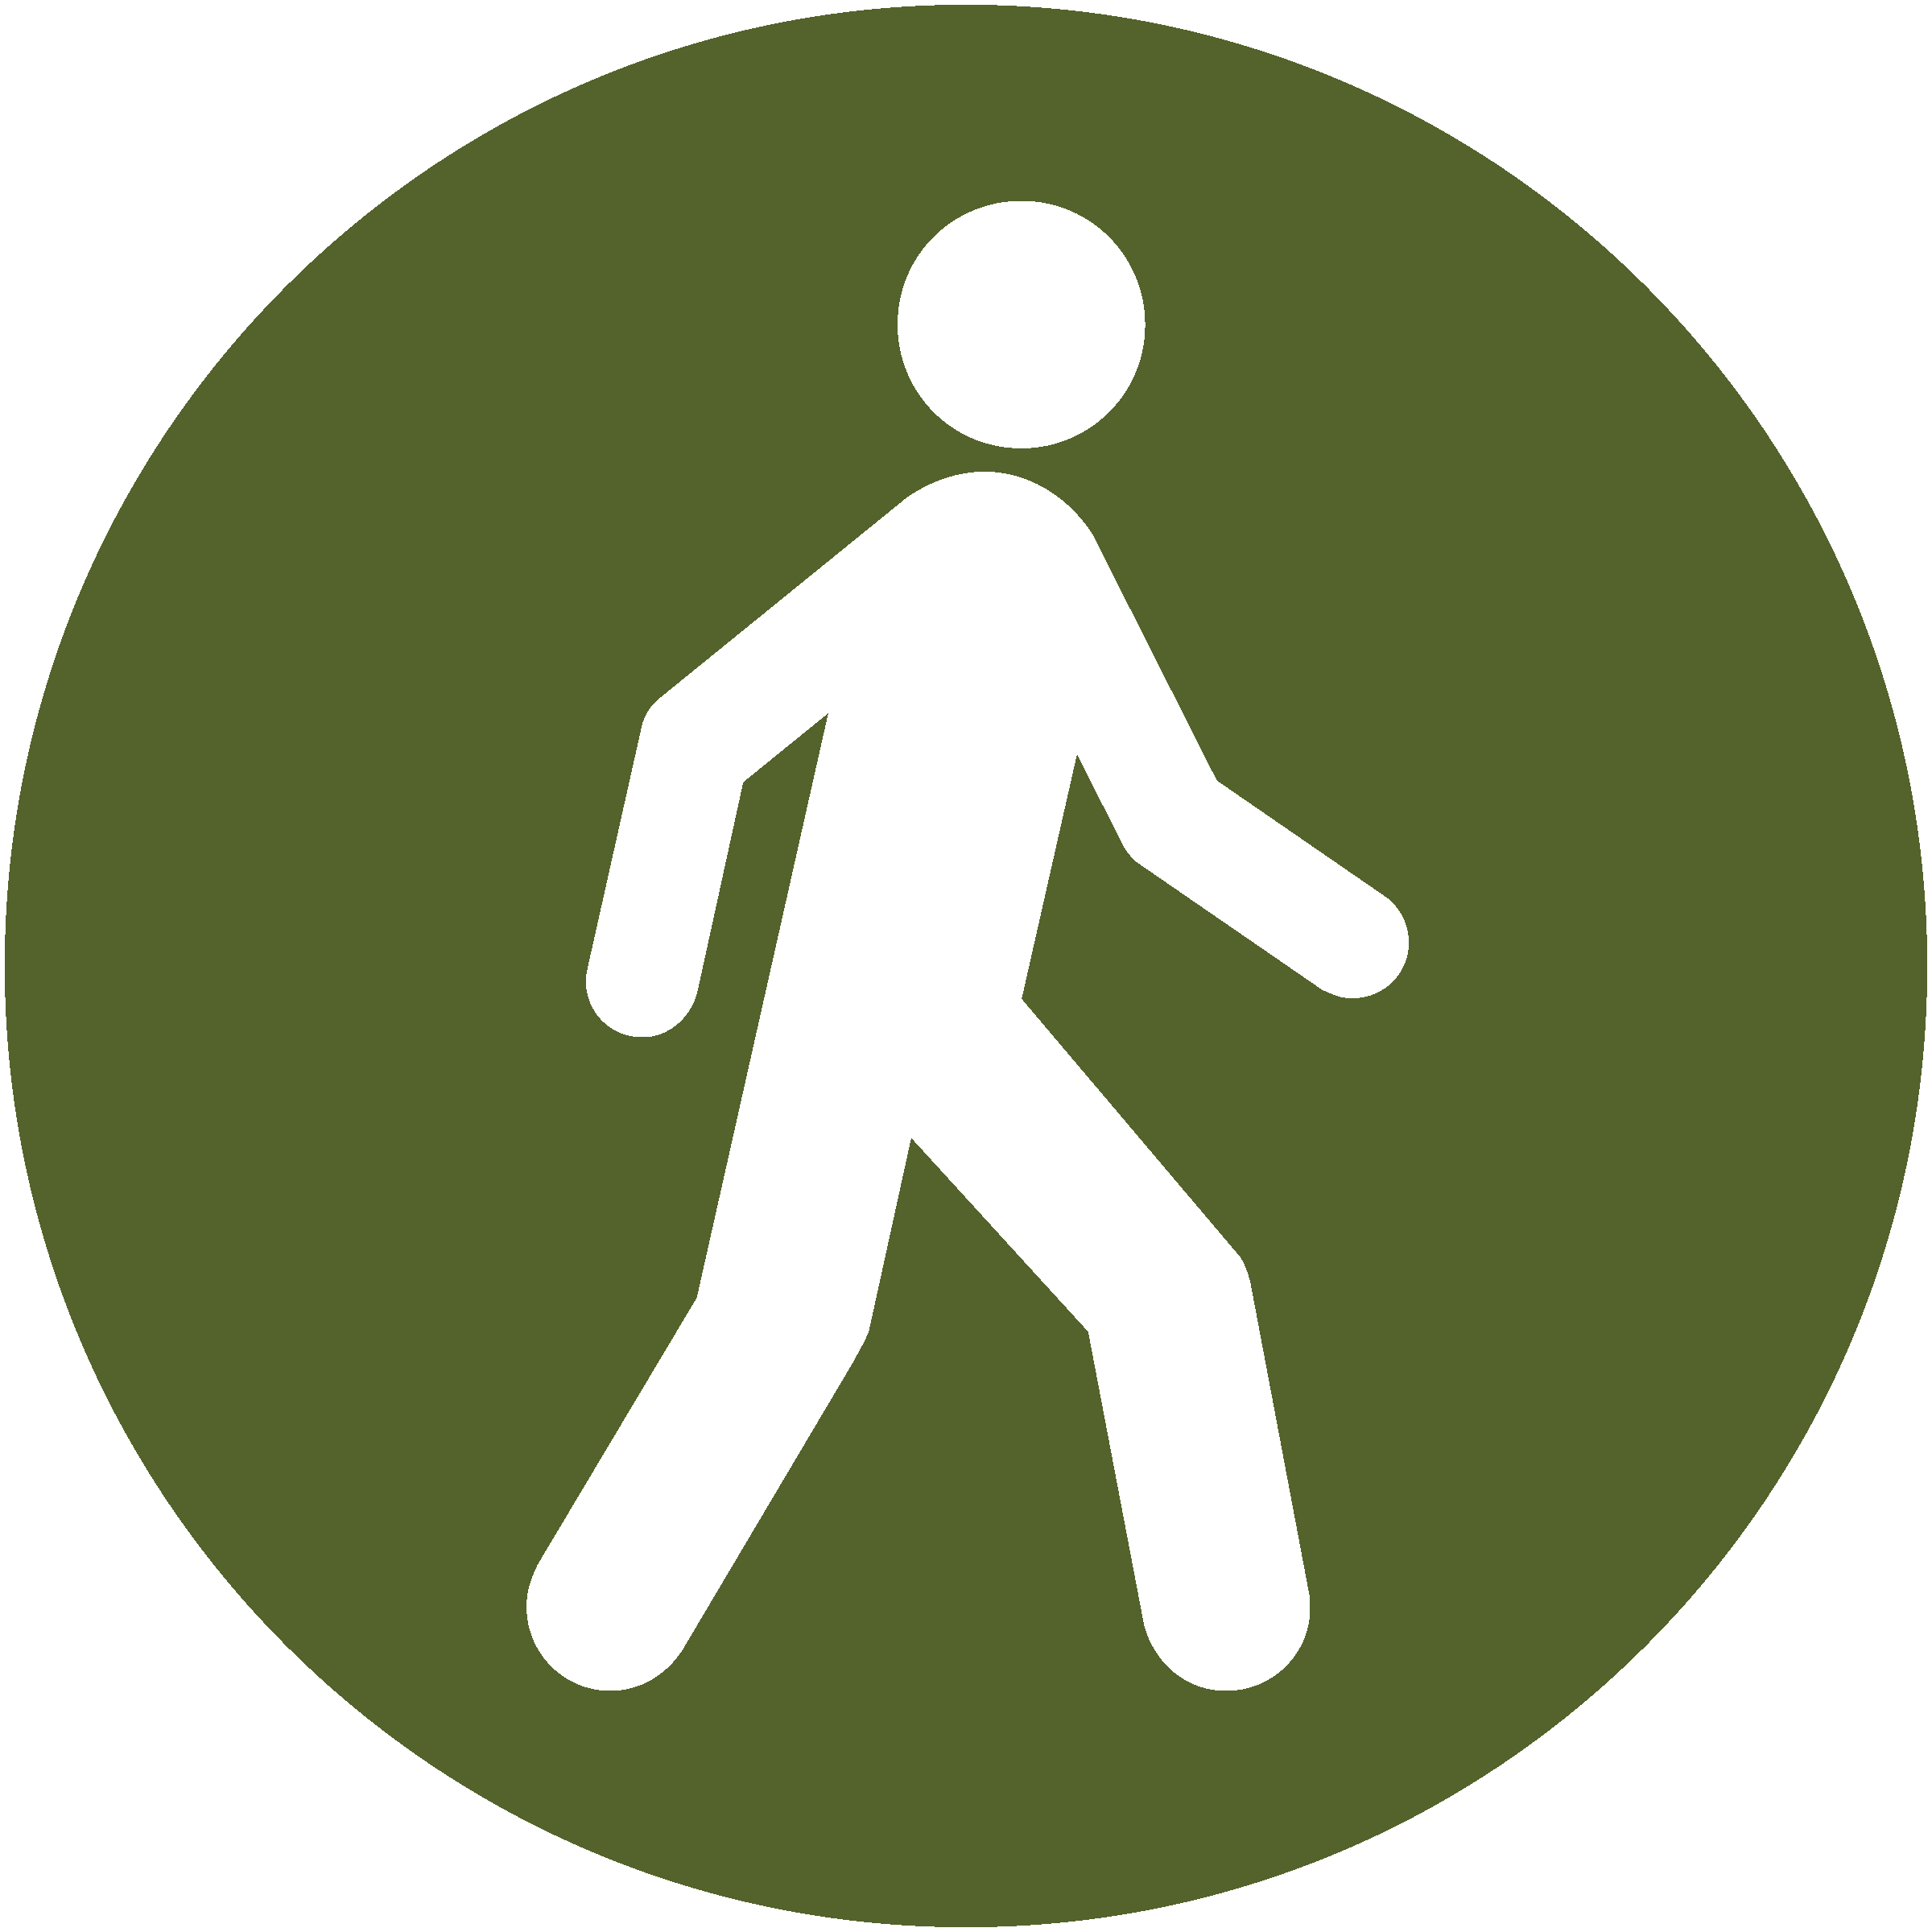 icon of person walking